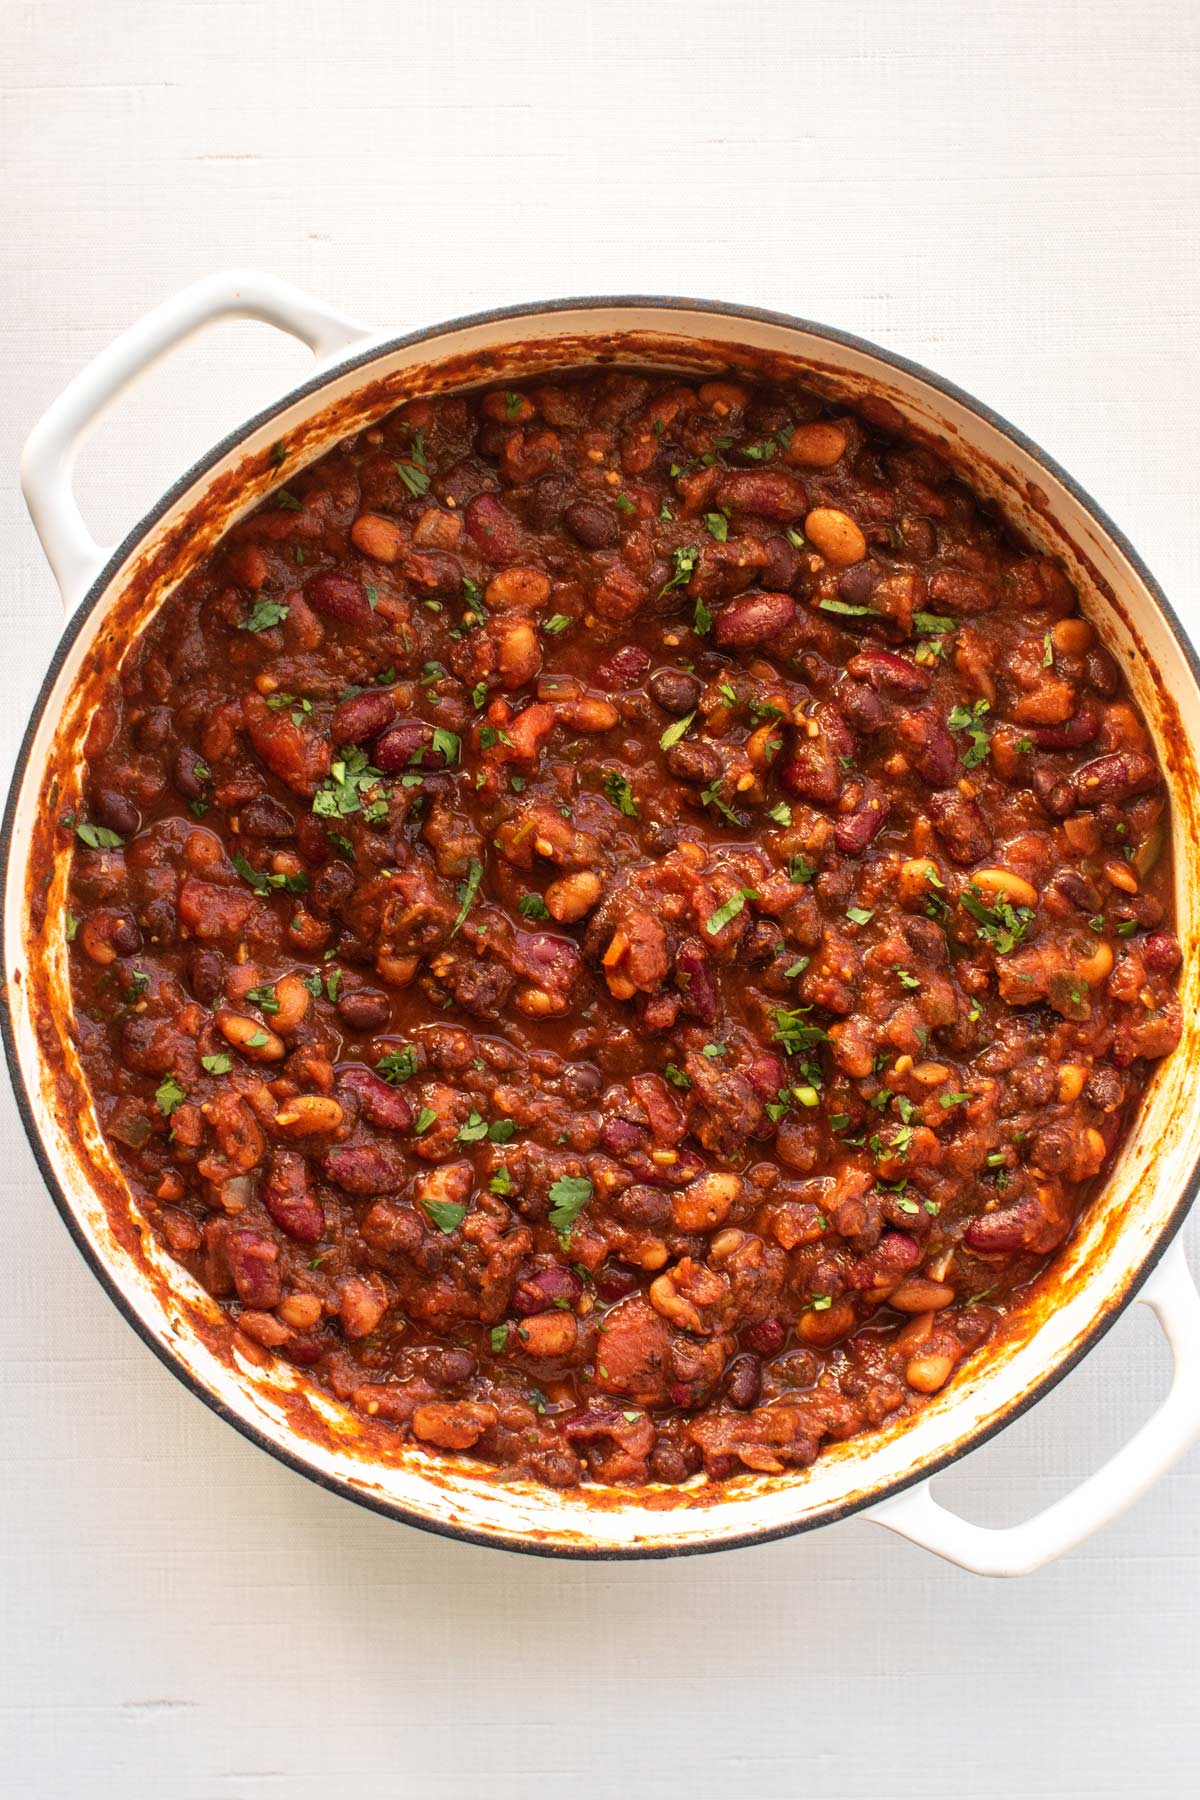 the finished chili in a pan.